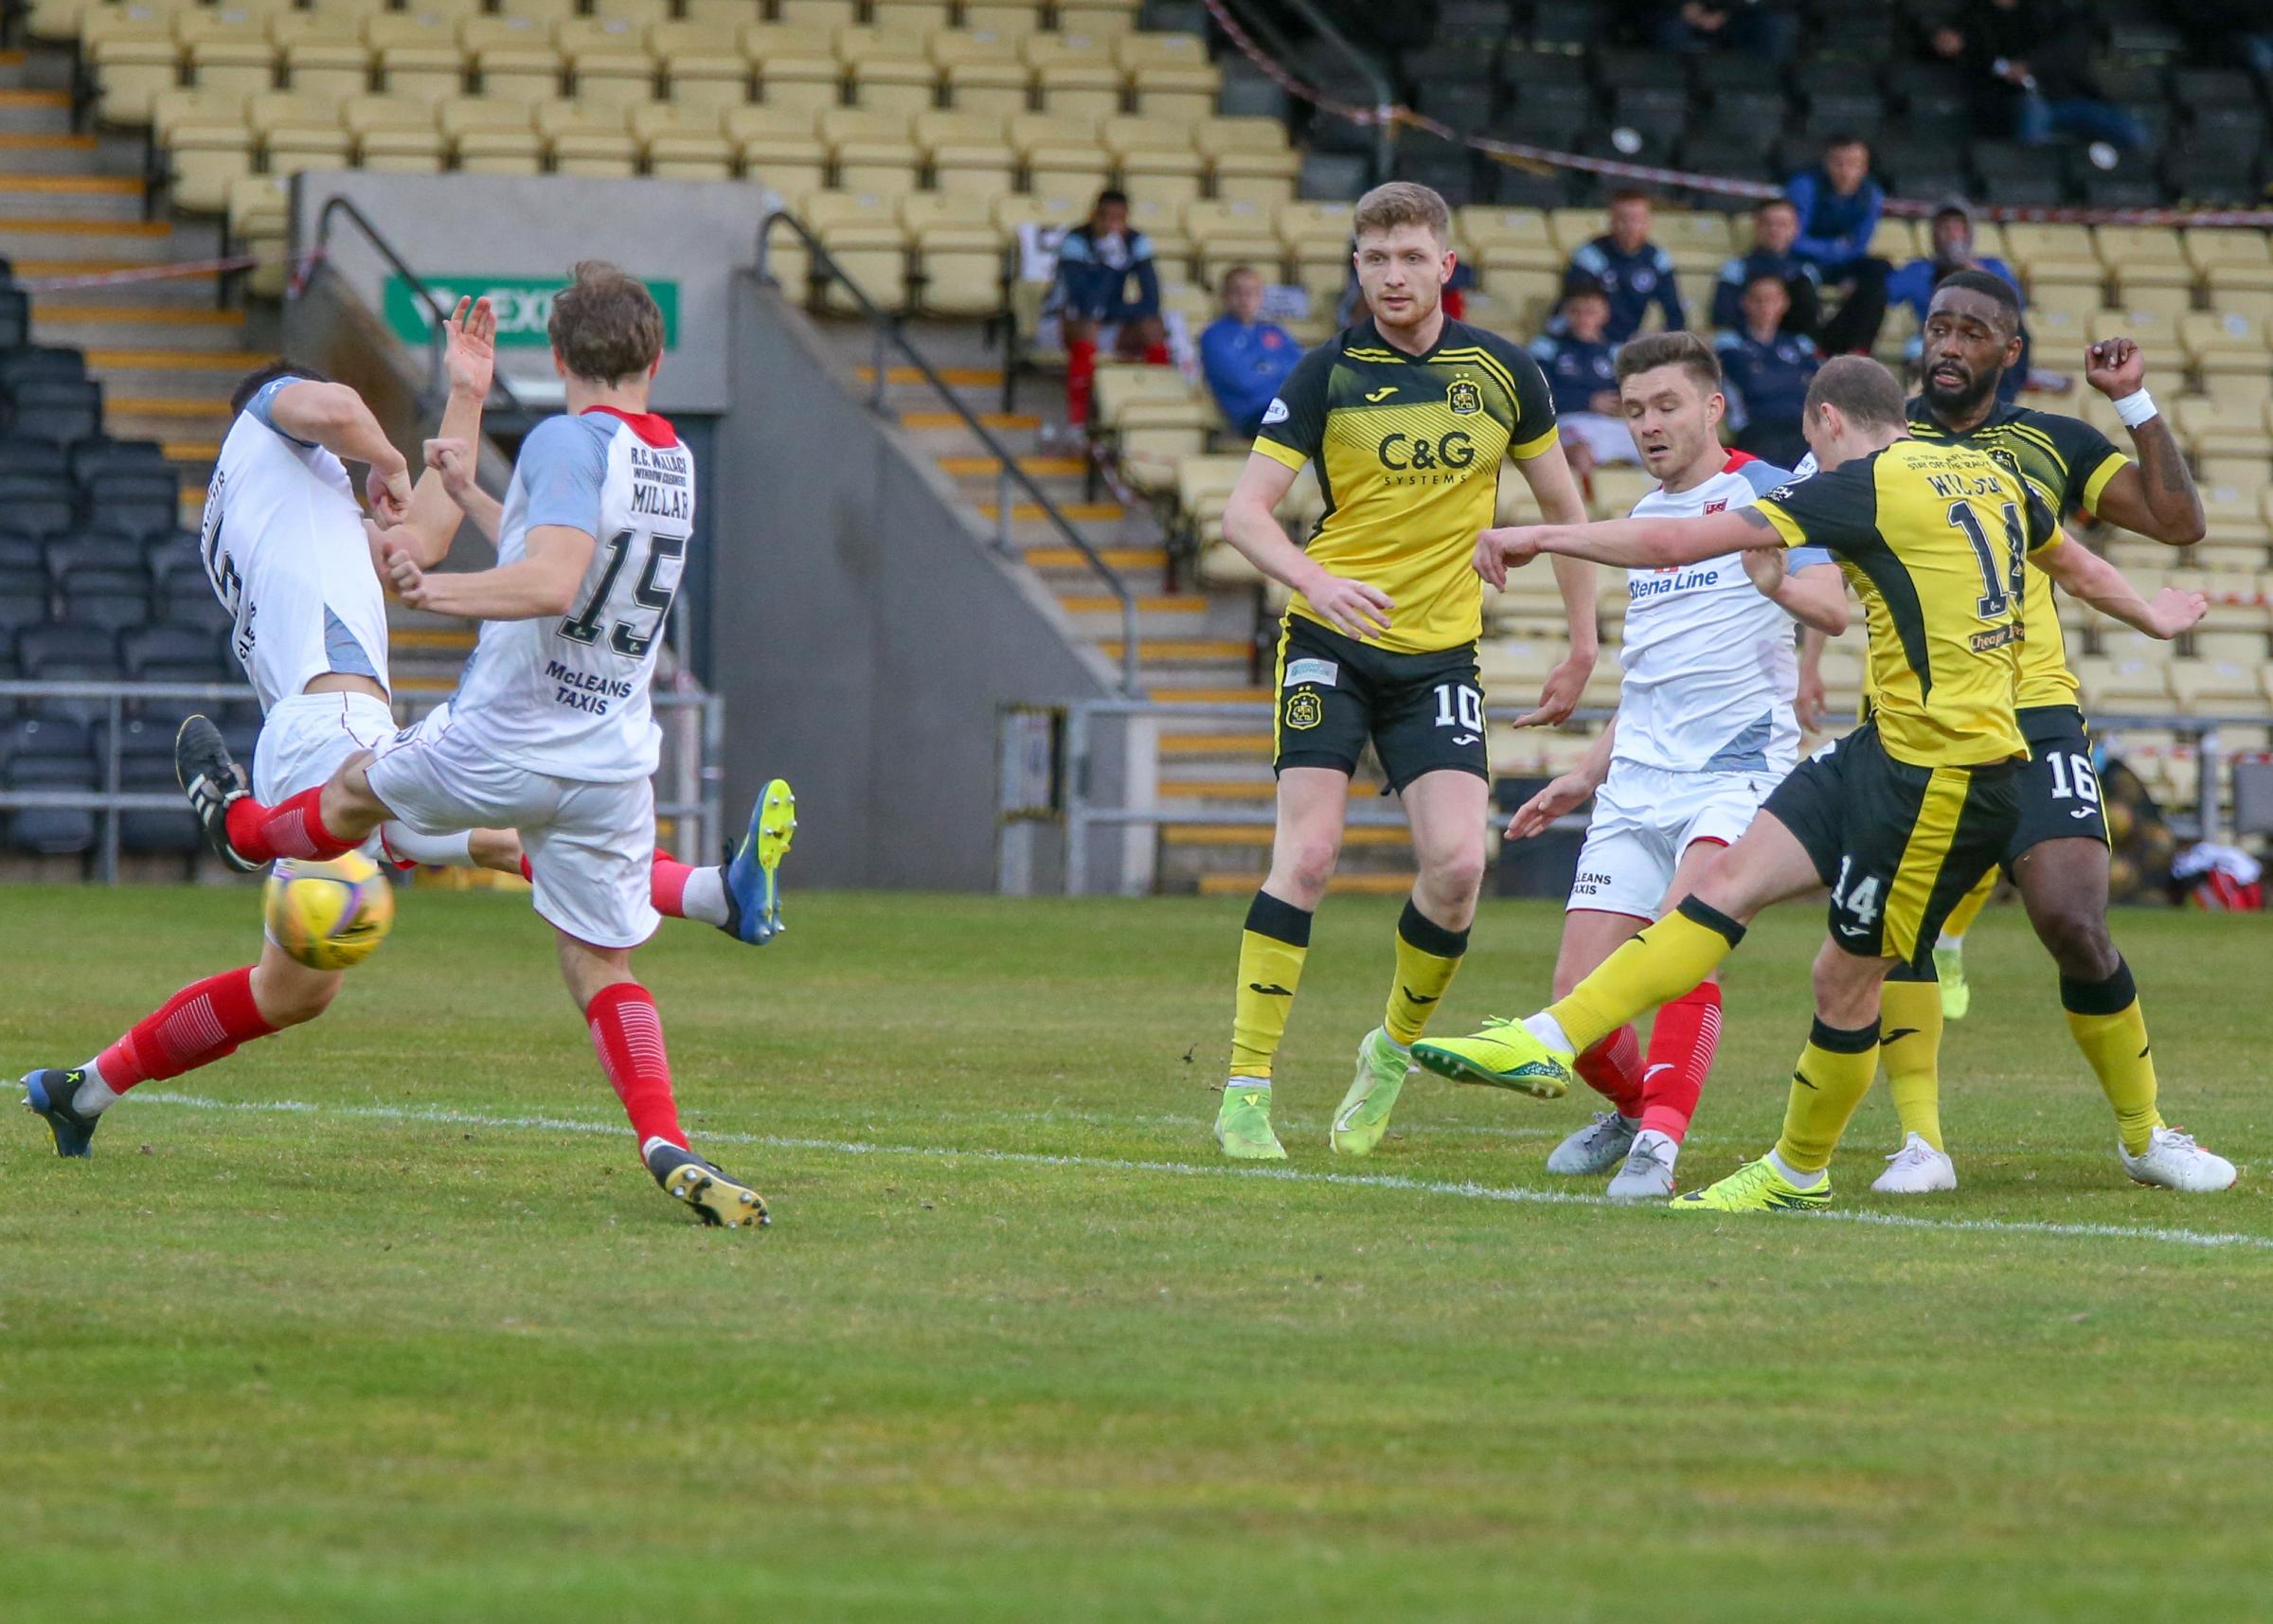 Dumbarton made it through to a play-off final against Edinburgh City after Jaime Wilsons goal earned a 1-0 aggregate win in the semi-final against Stranraer (Photo - Andy Scott)